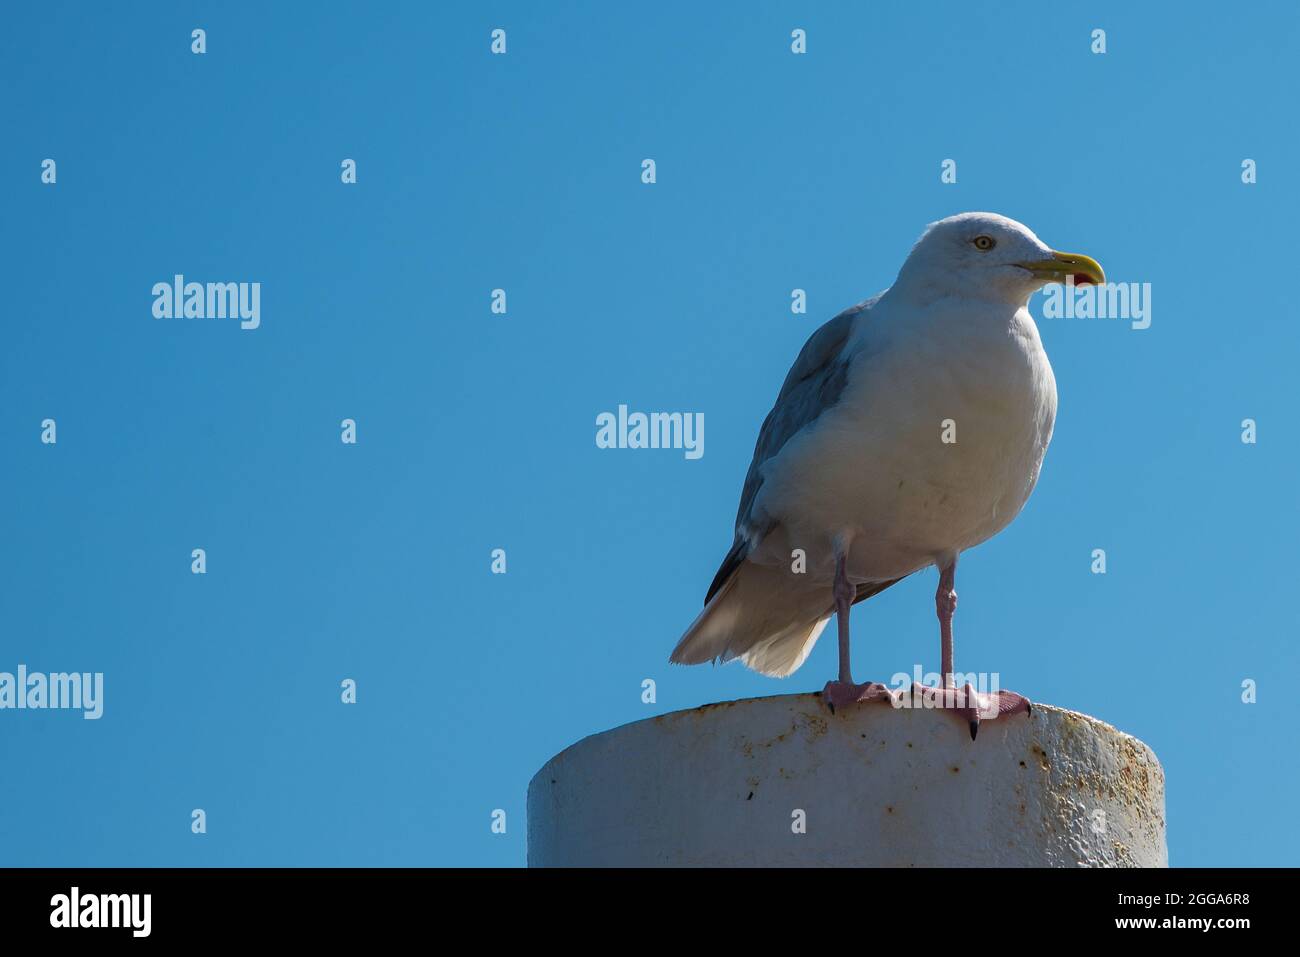 Texel, the Netherlands. August 13, 2021.Screaming seagull on a mooring post. High quality photo Stock Photo